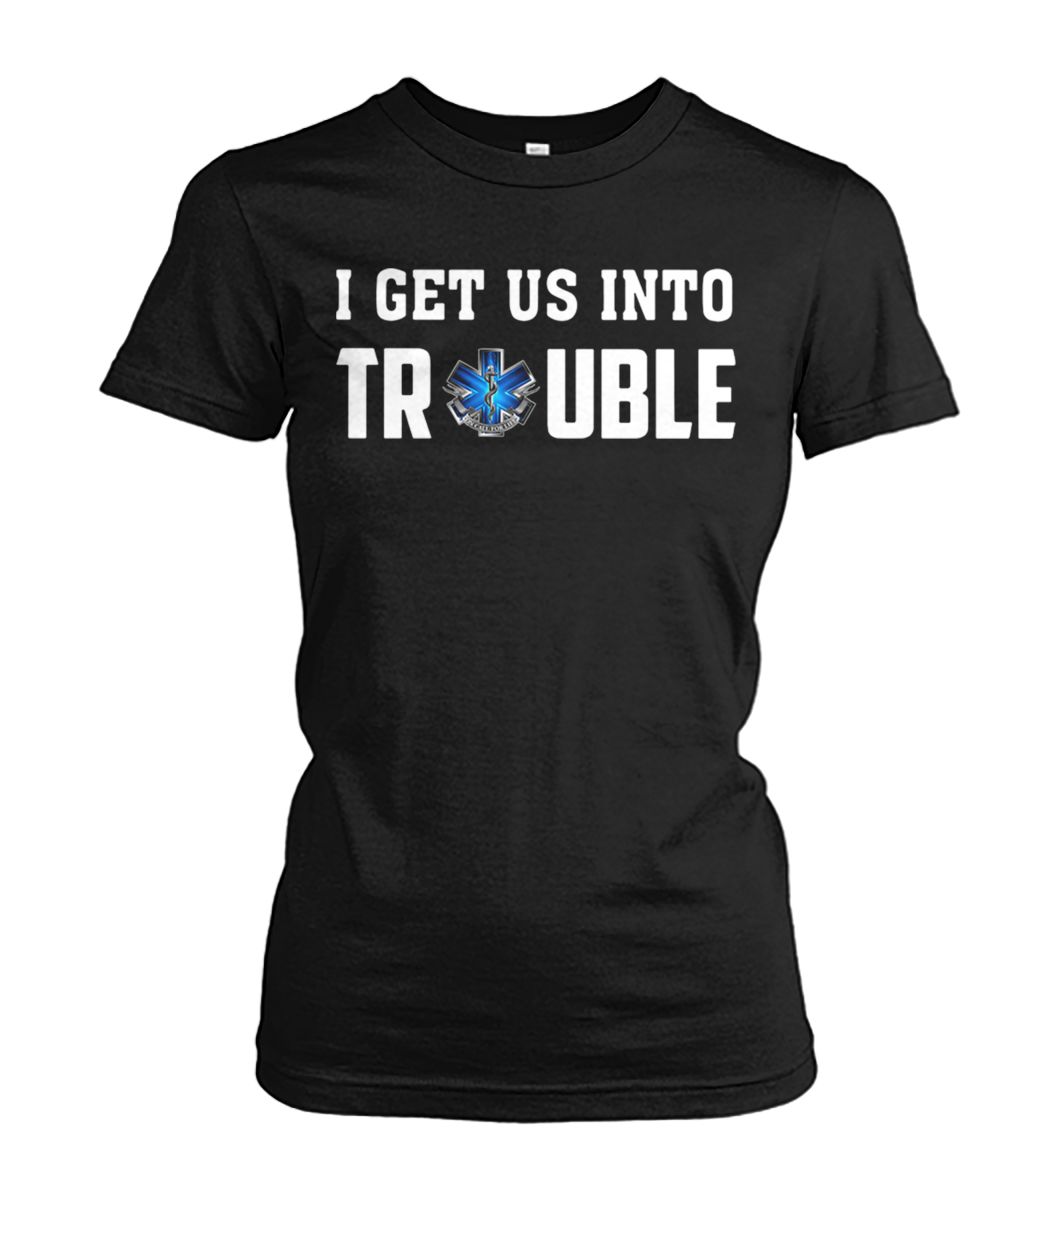 I get us into trouble on call for life blue snake women's crew tee